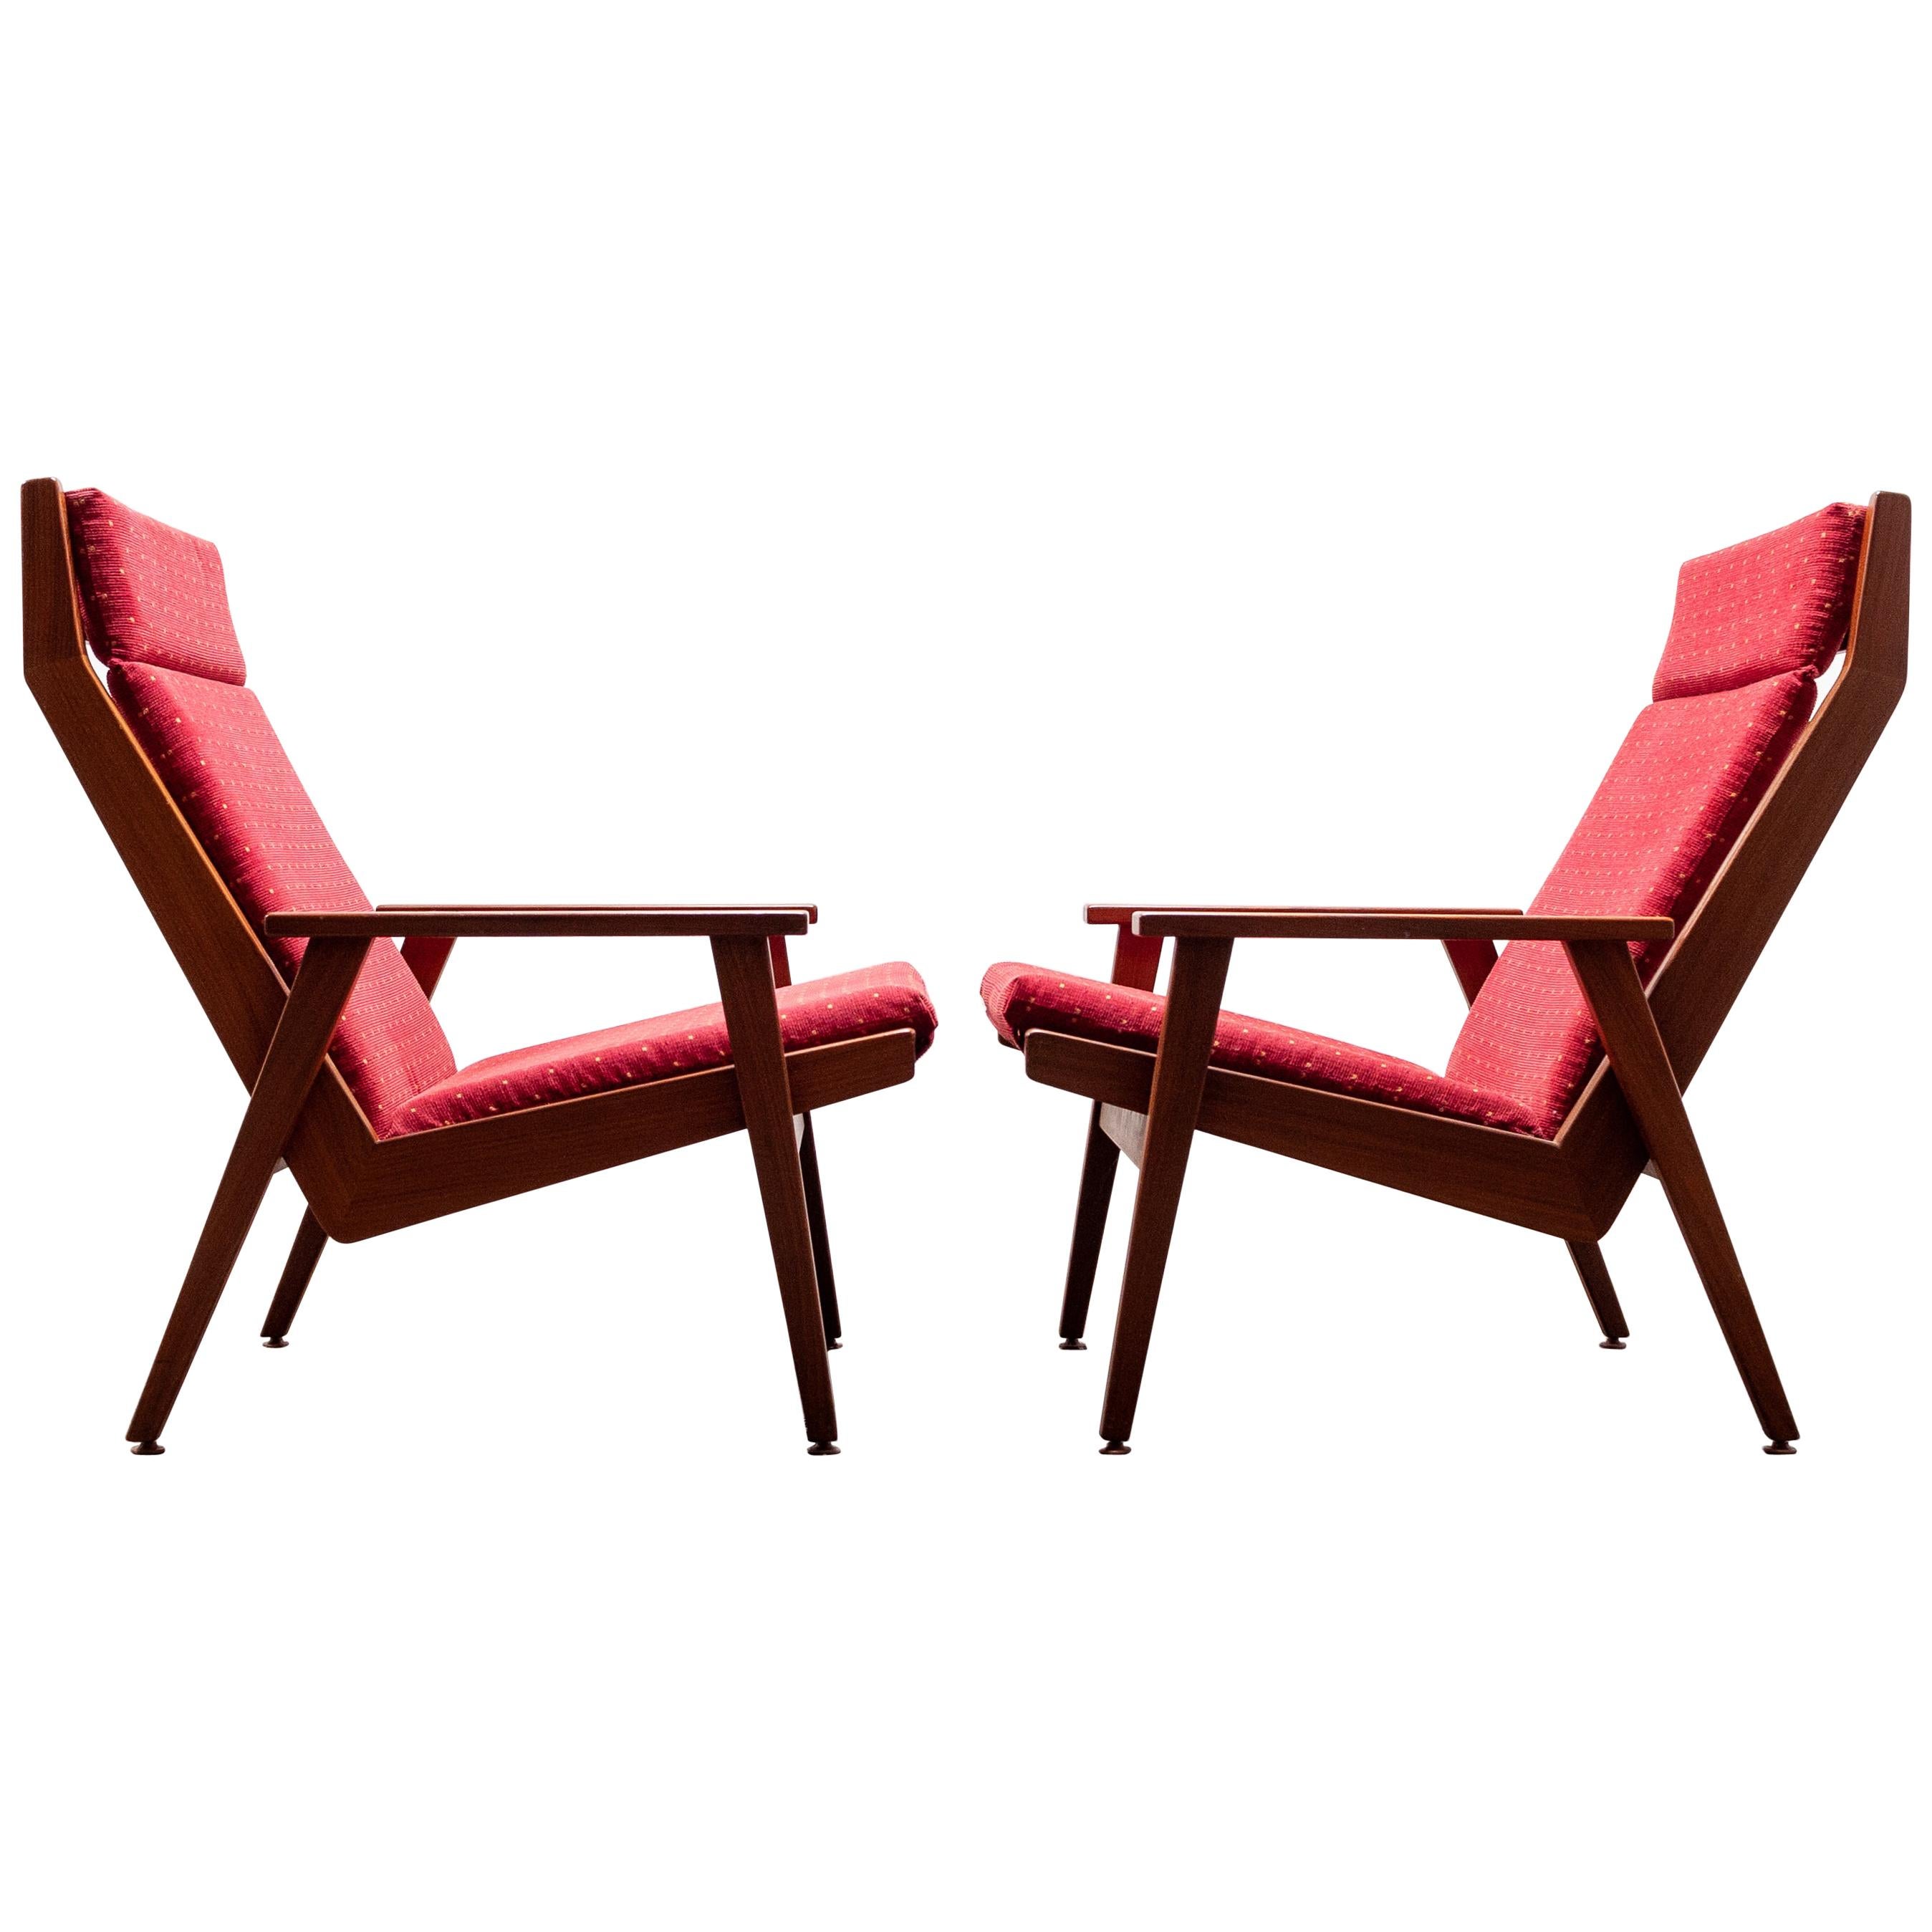 Two Rob Parry Lotus Lounge Chairs, 1950s